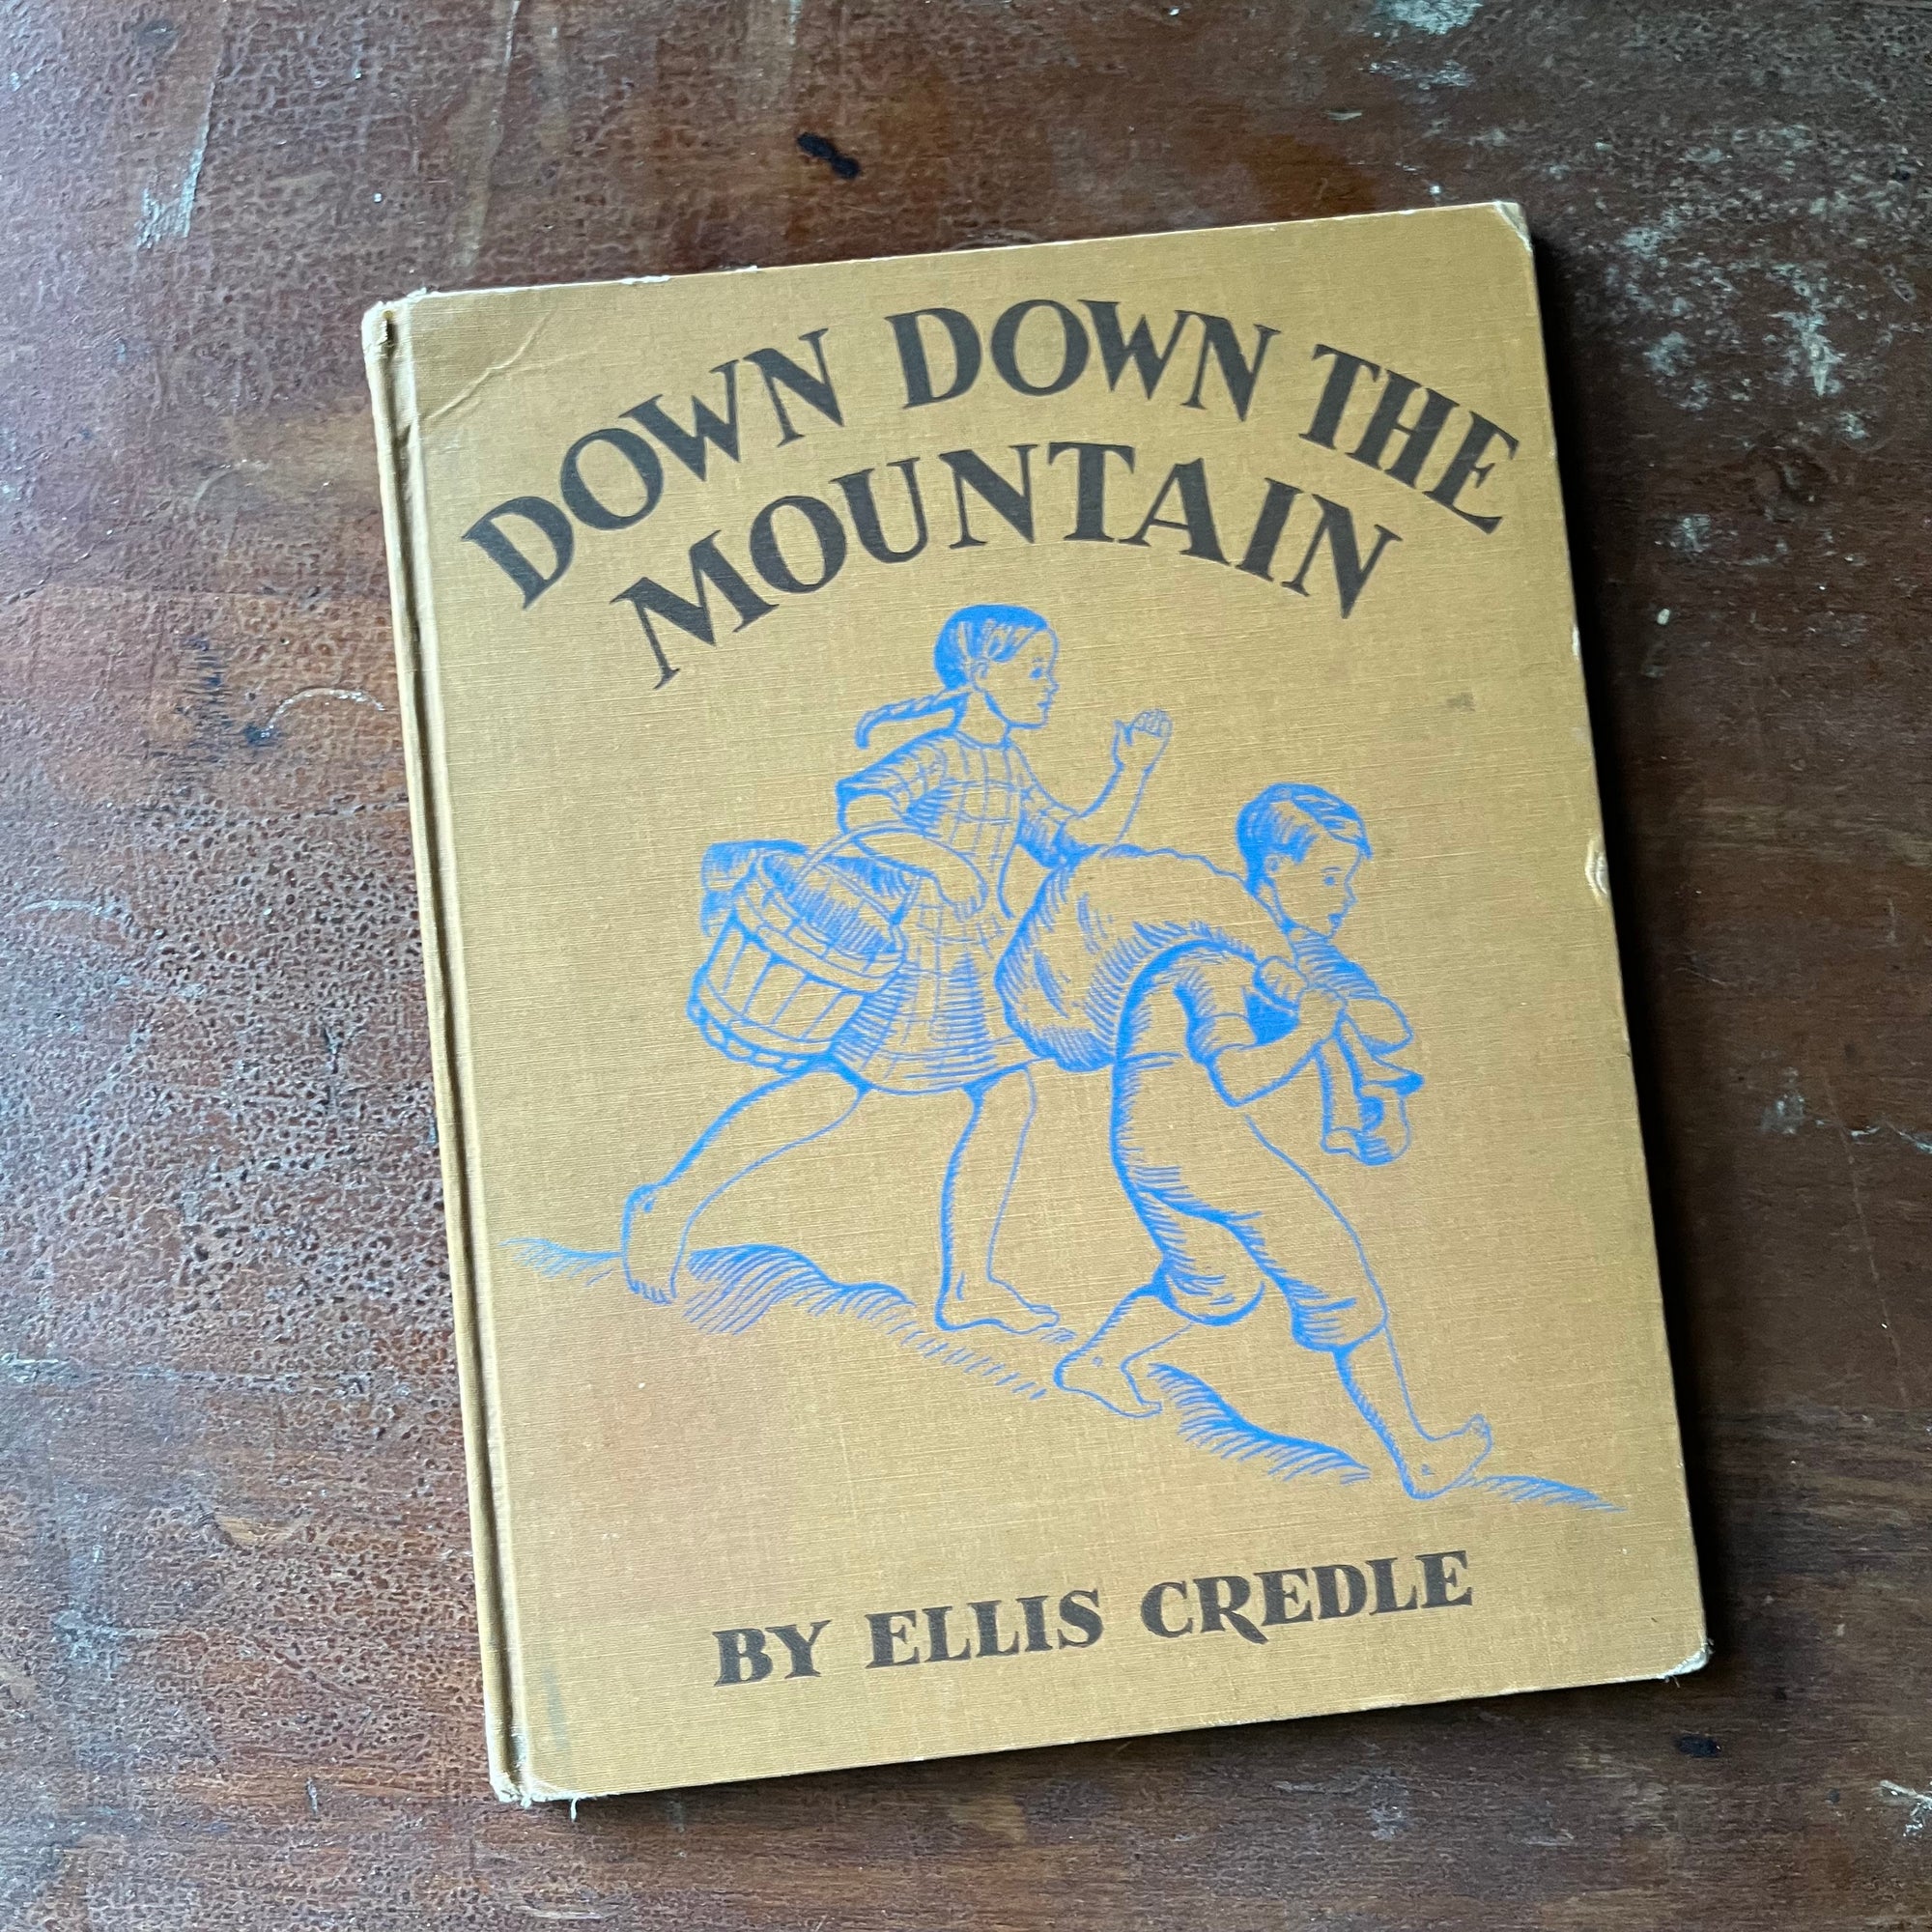 vintage children's picture book, award winning book - Down Down The Mountain written and illustration by Ellis Credle - view of the front cover with the two children pictured